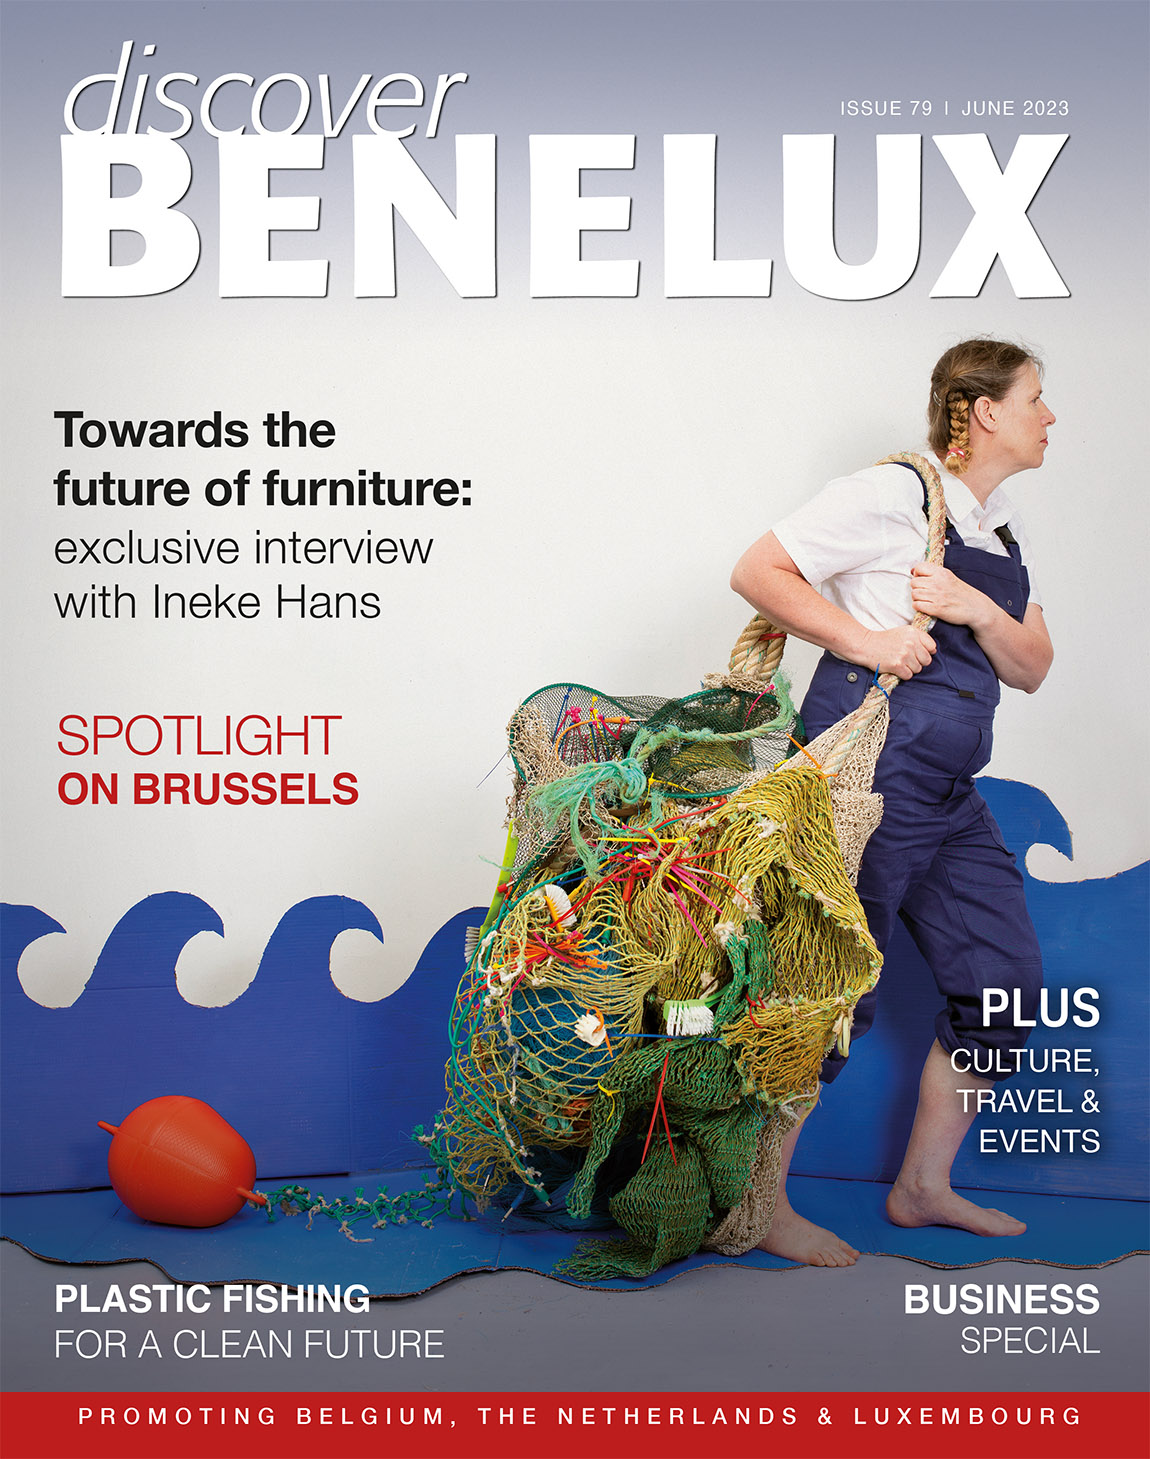 Discover Benelux, Issue 77, April 2023 by Scan Client Publishing